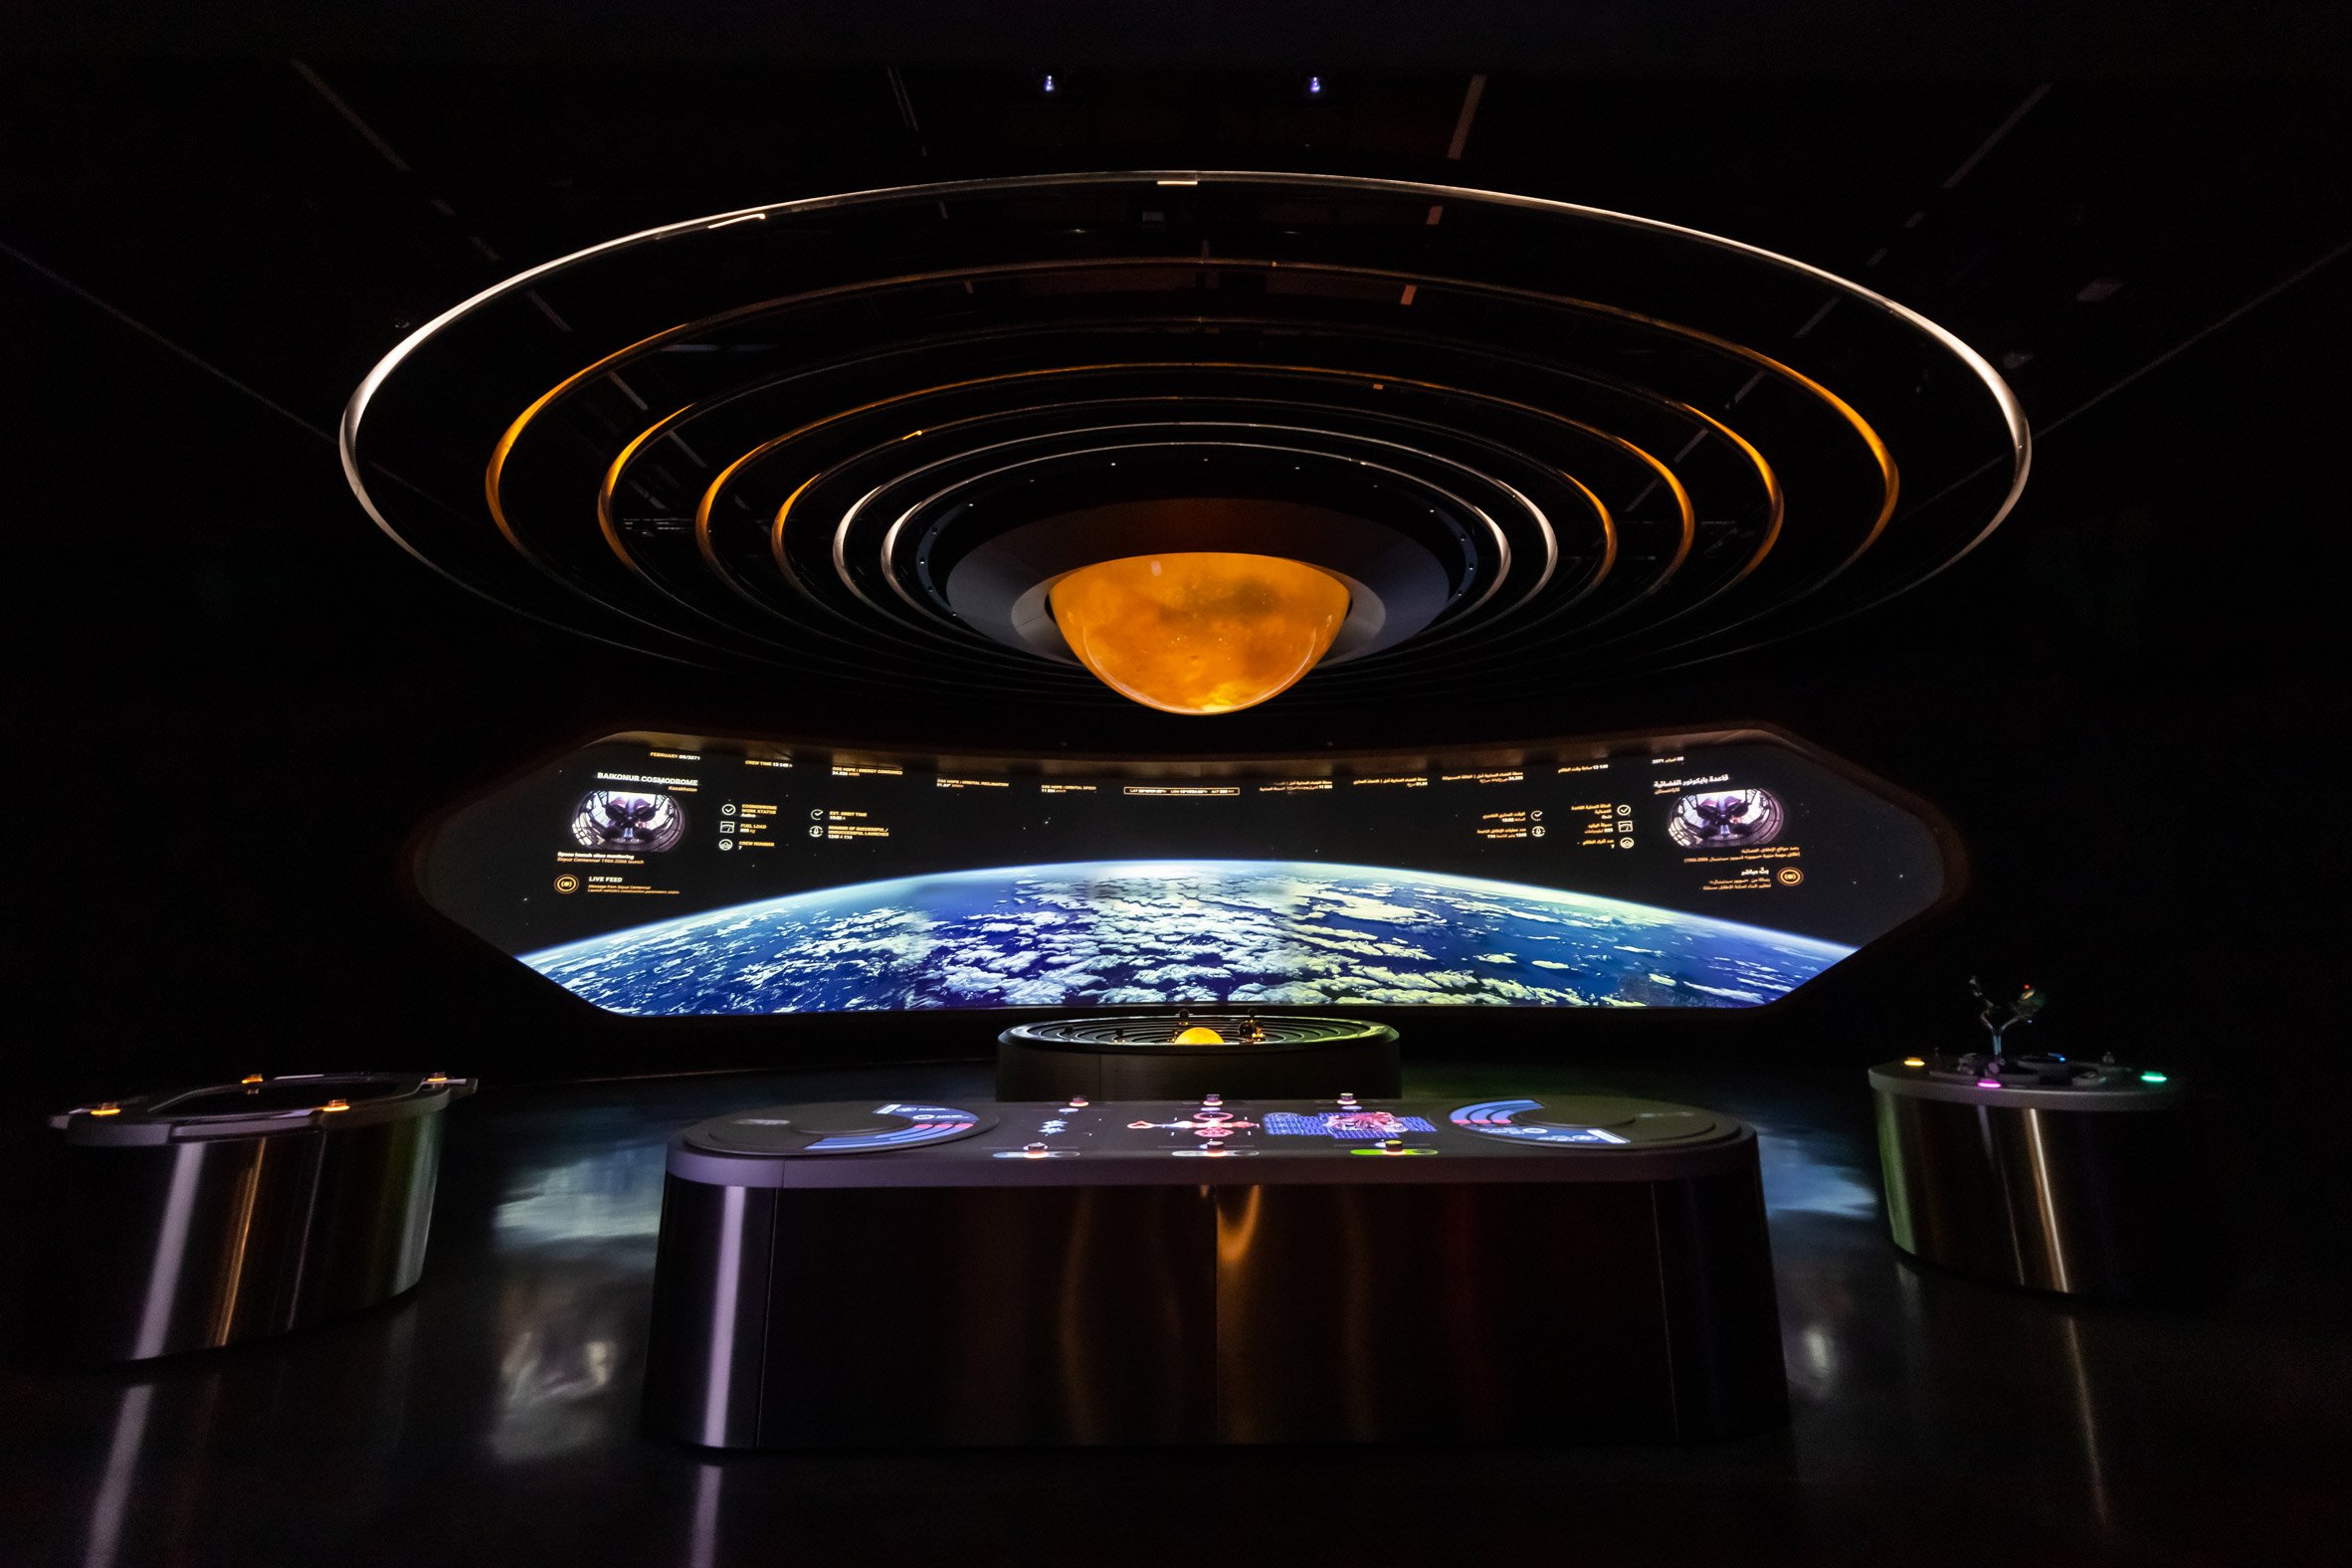 Gallery showing space travel